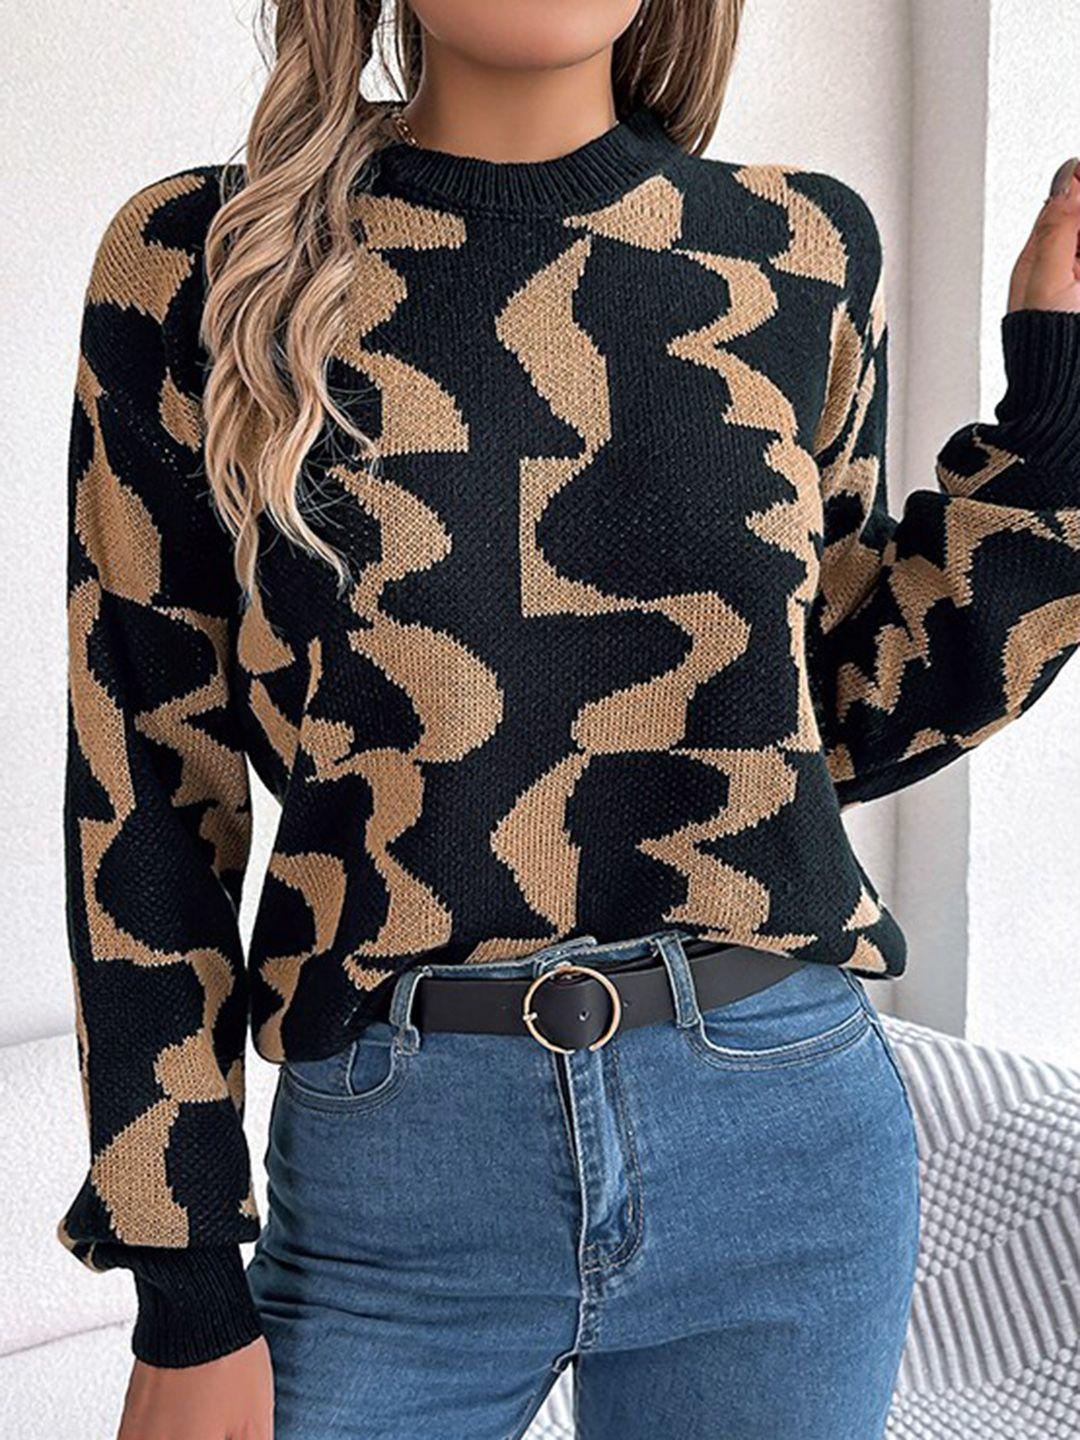 stylecast khaki abstract printed round neck long sleeves acrylic pullover sweater